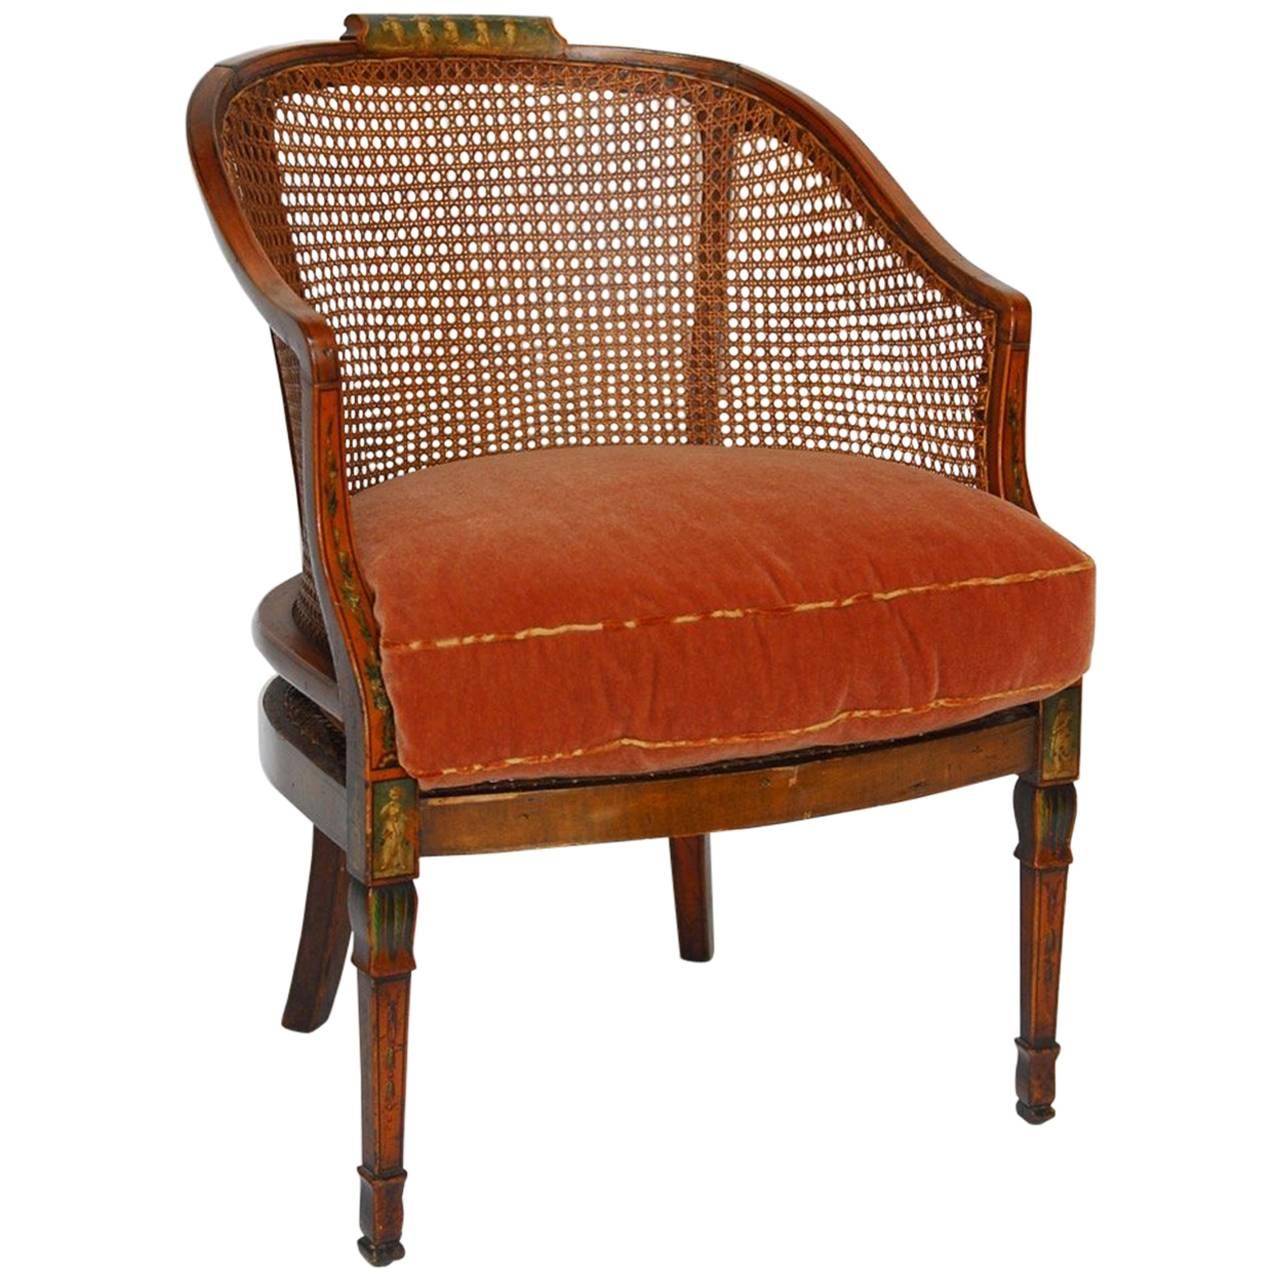 English Painted and Caned Edwardian Armchair